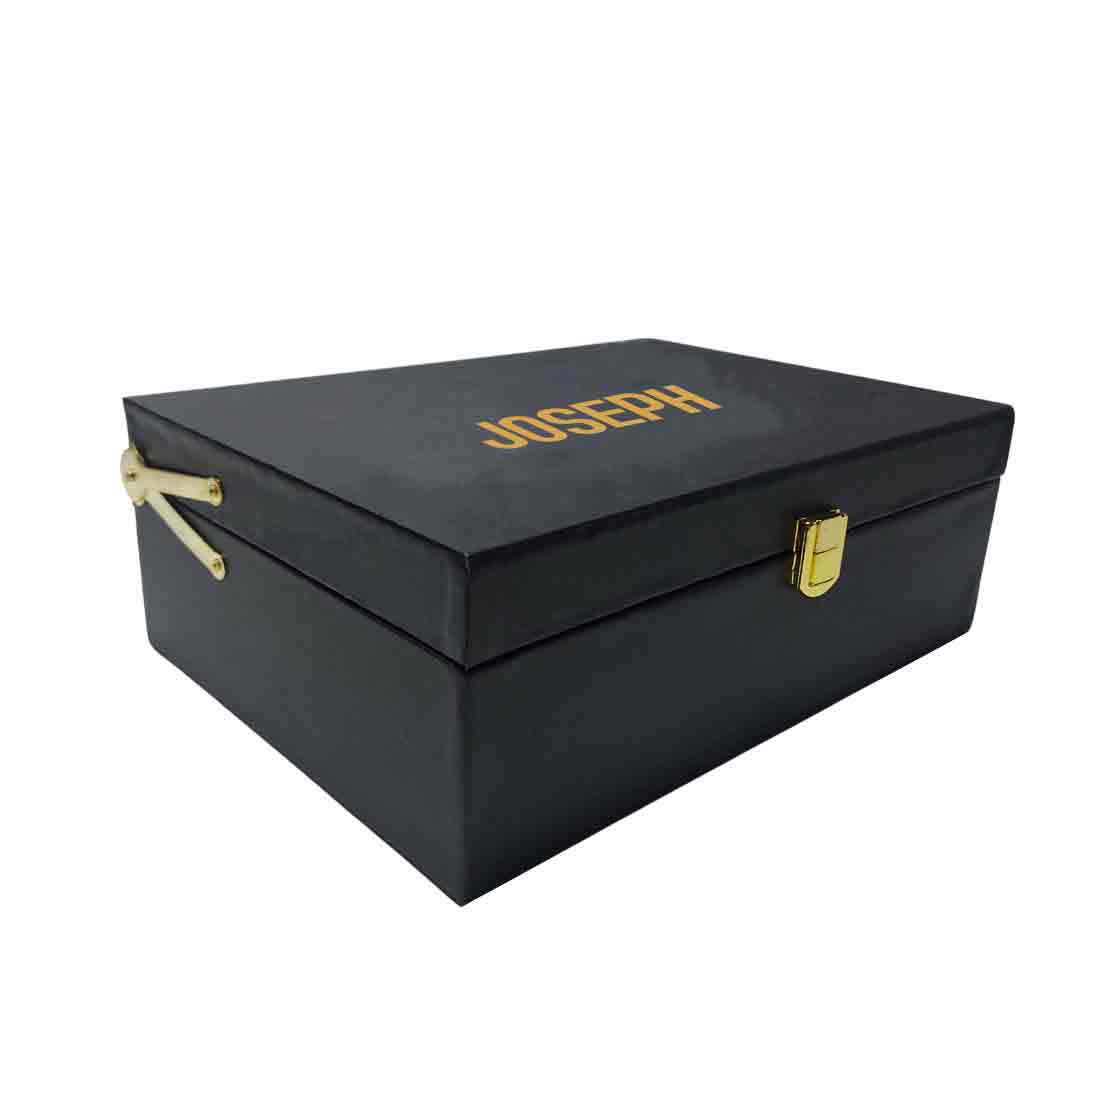 Personalized Gift Boxes for Men Women Vegan Leather Box - Add Name